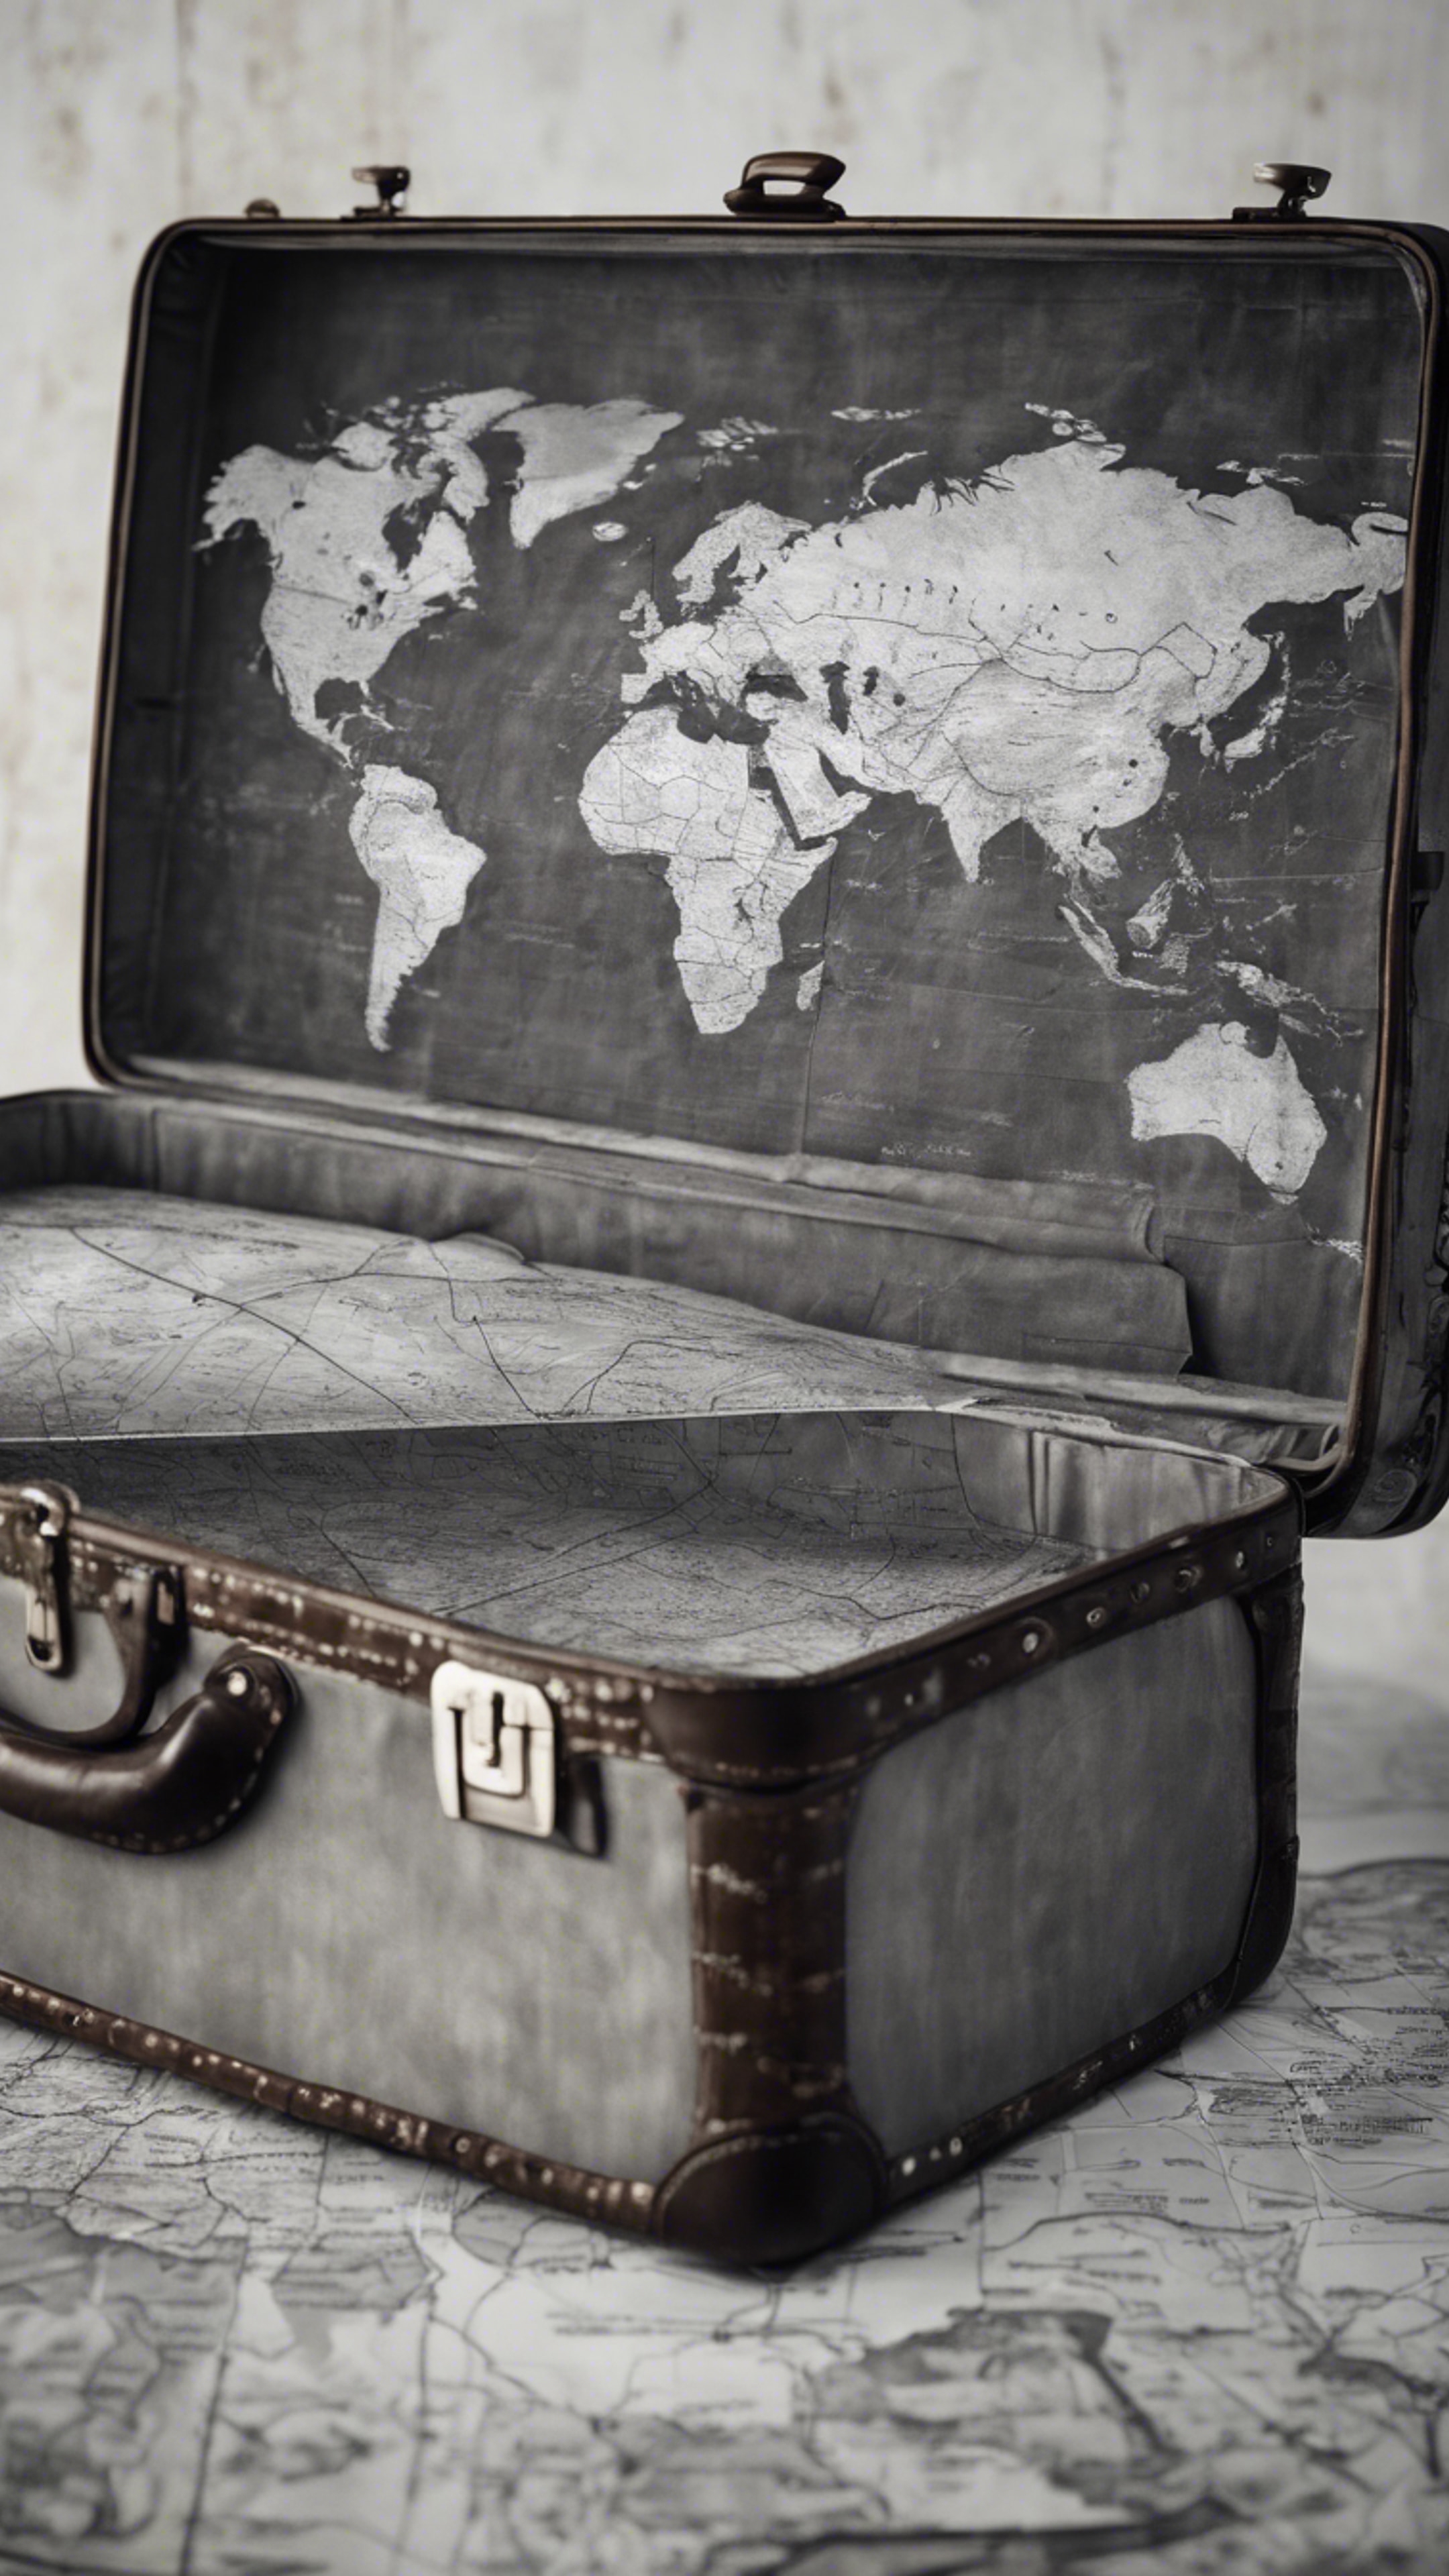 A grayscale world map painted on a vintage suitcase.壁紙[27f356ac8e6847fe804a]